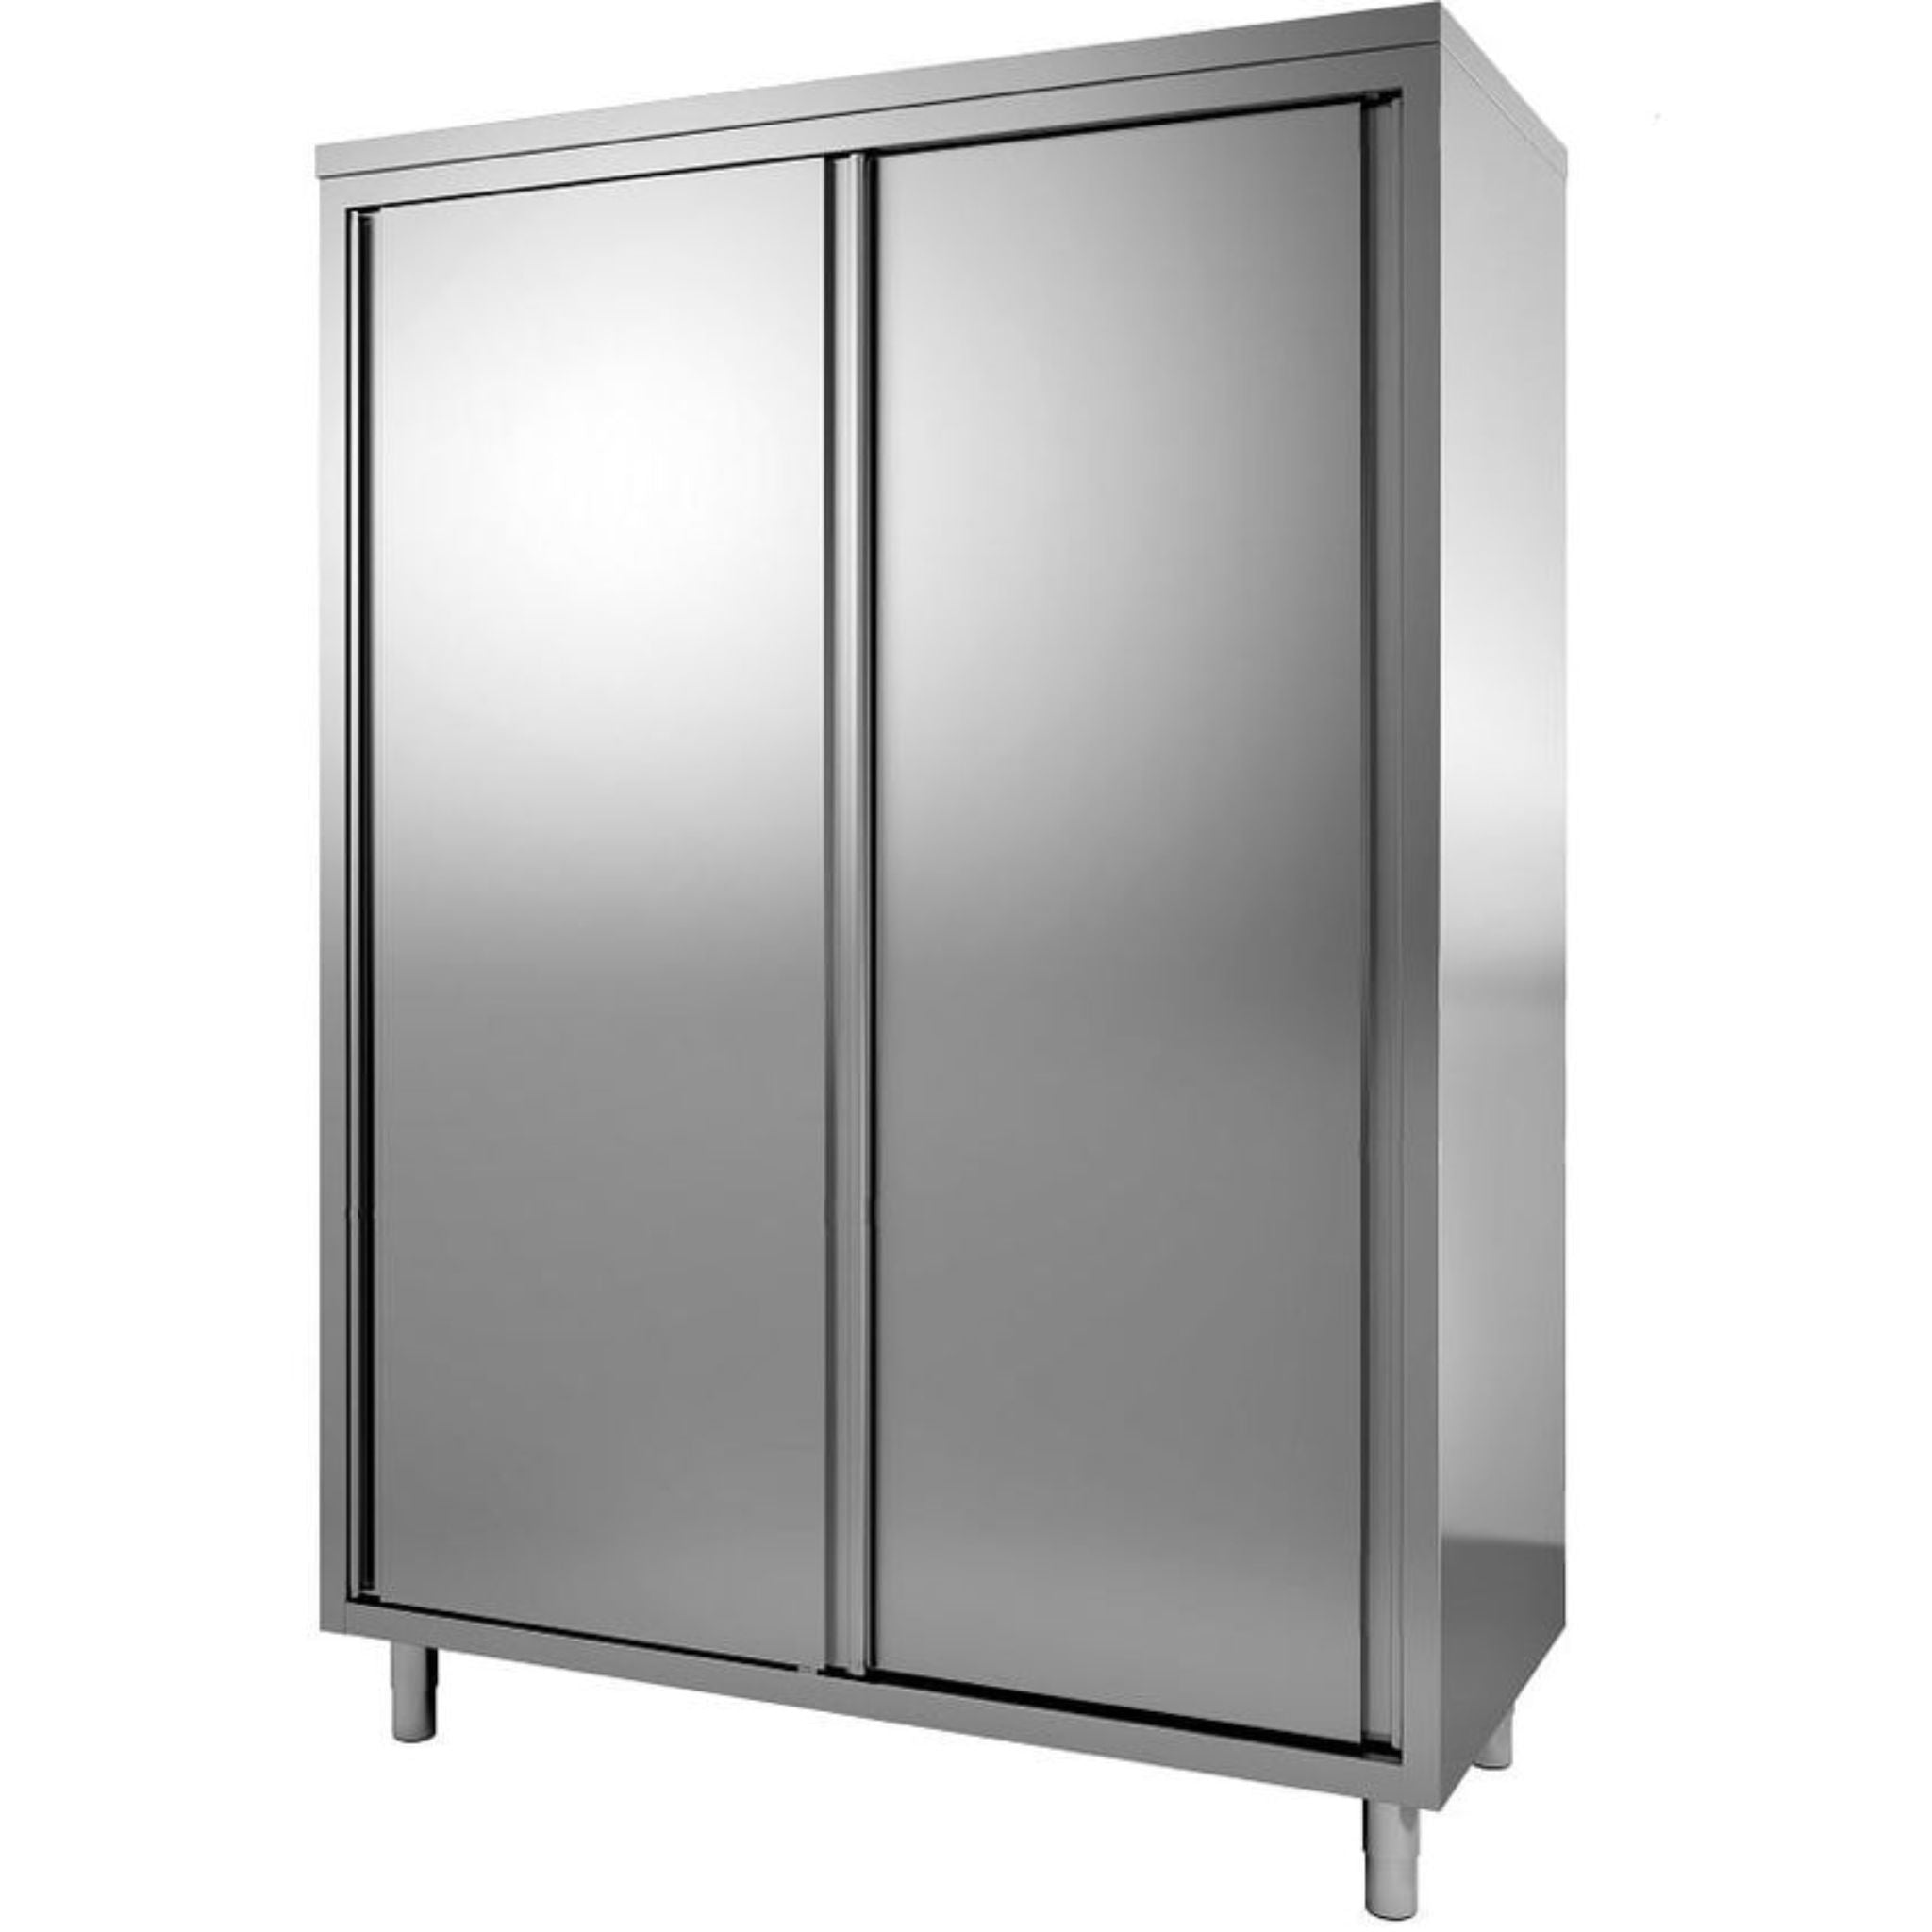 Stainless steel cabinet with standard sliding doors